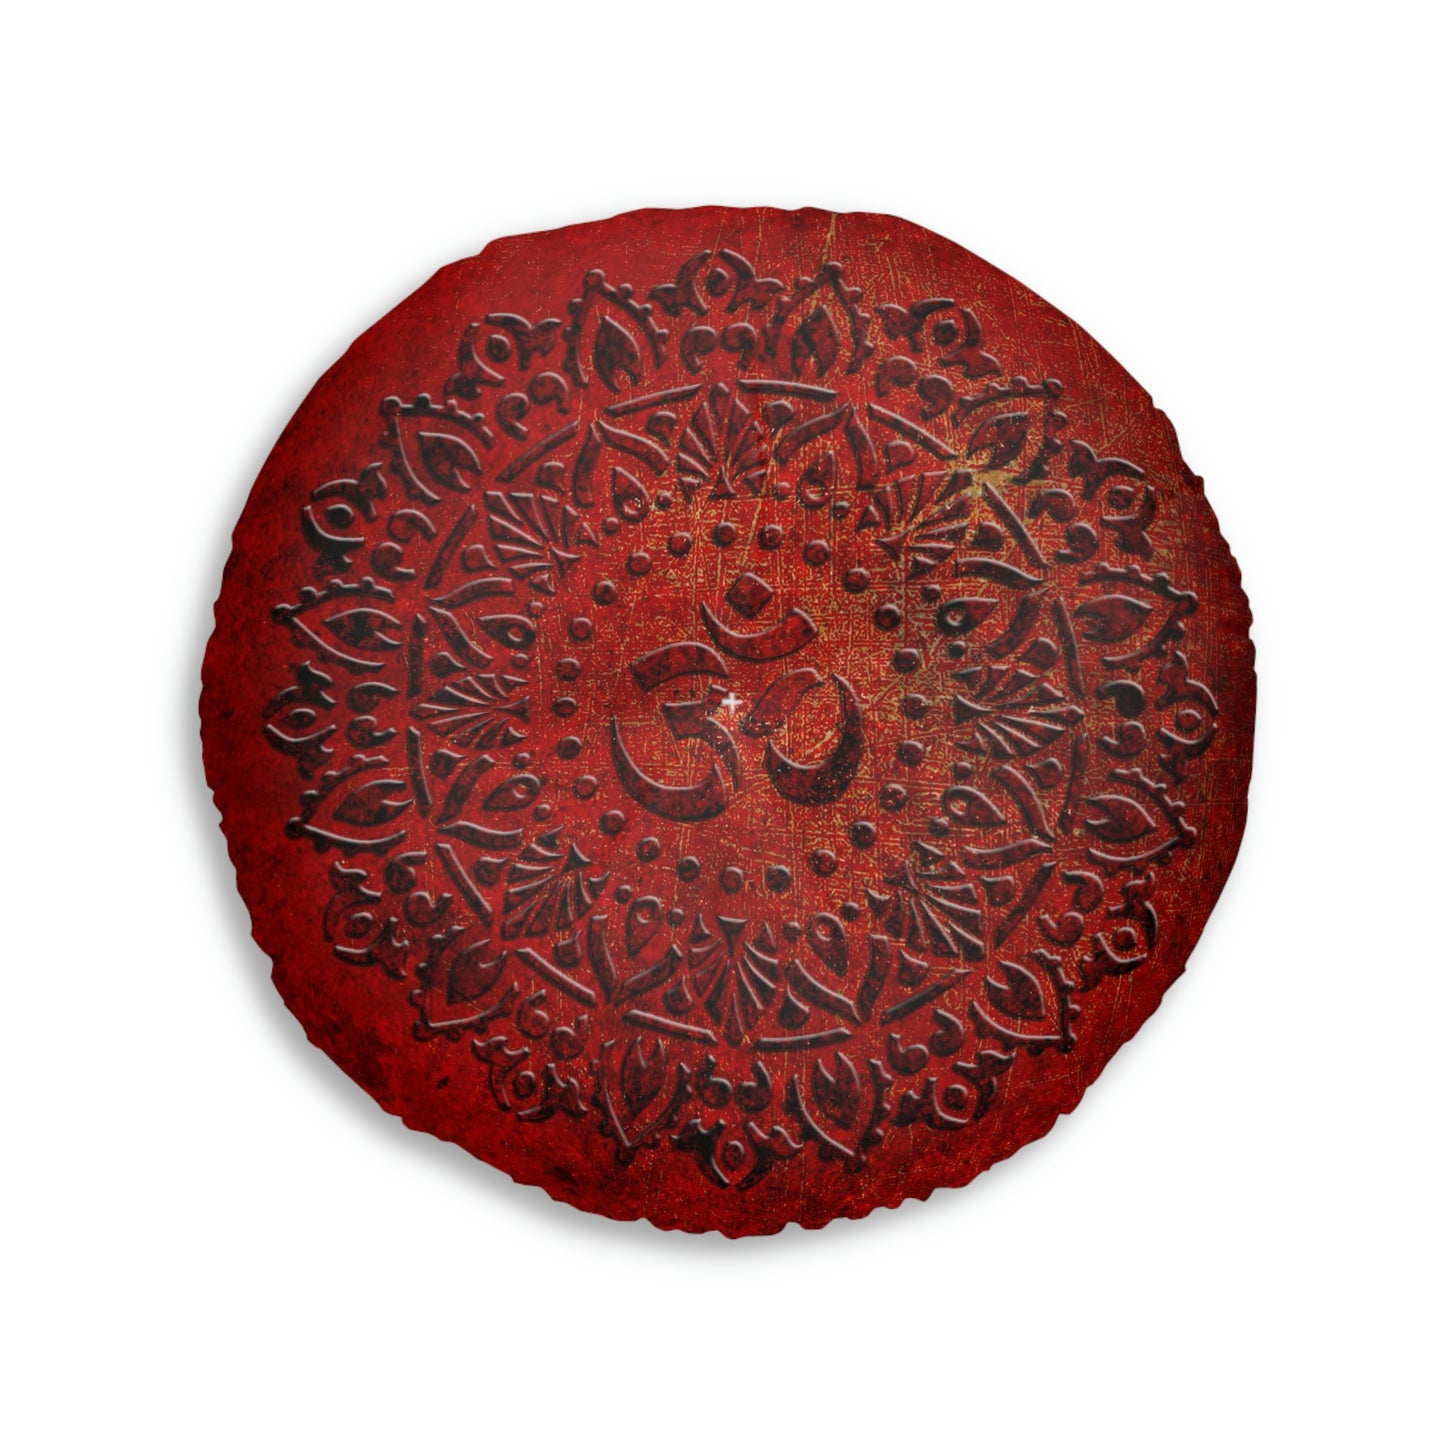 Mandala Style Om Symbol on Lava Red Background Print on Round Tufted Floor Pillow.